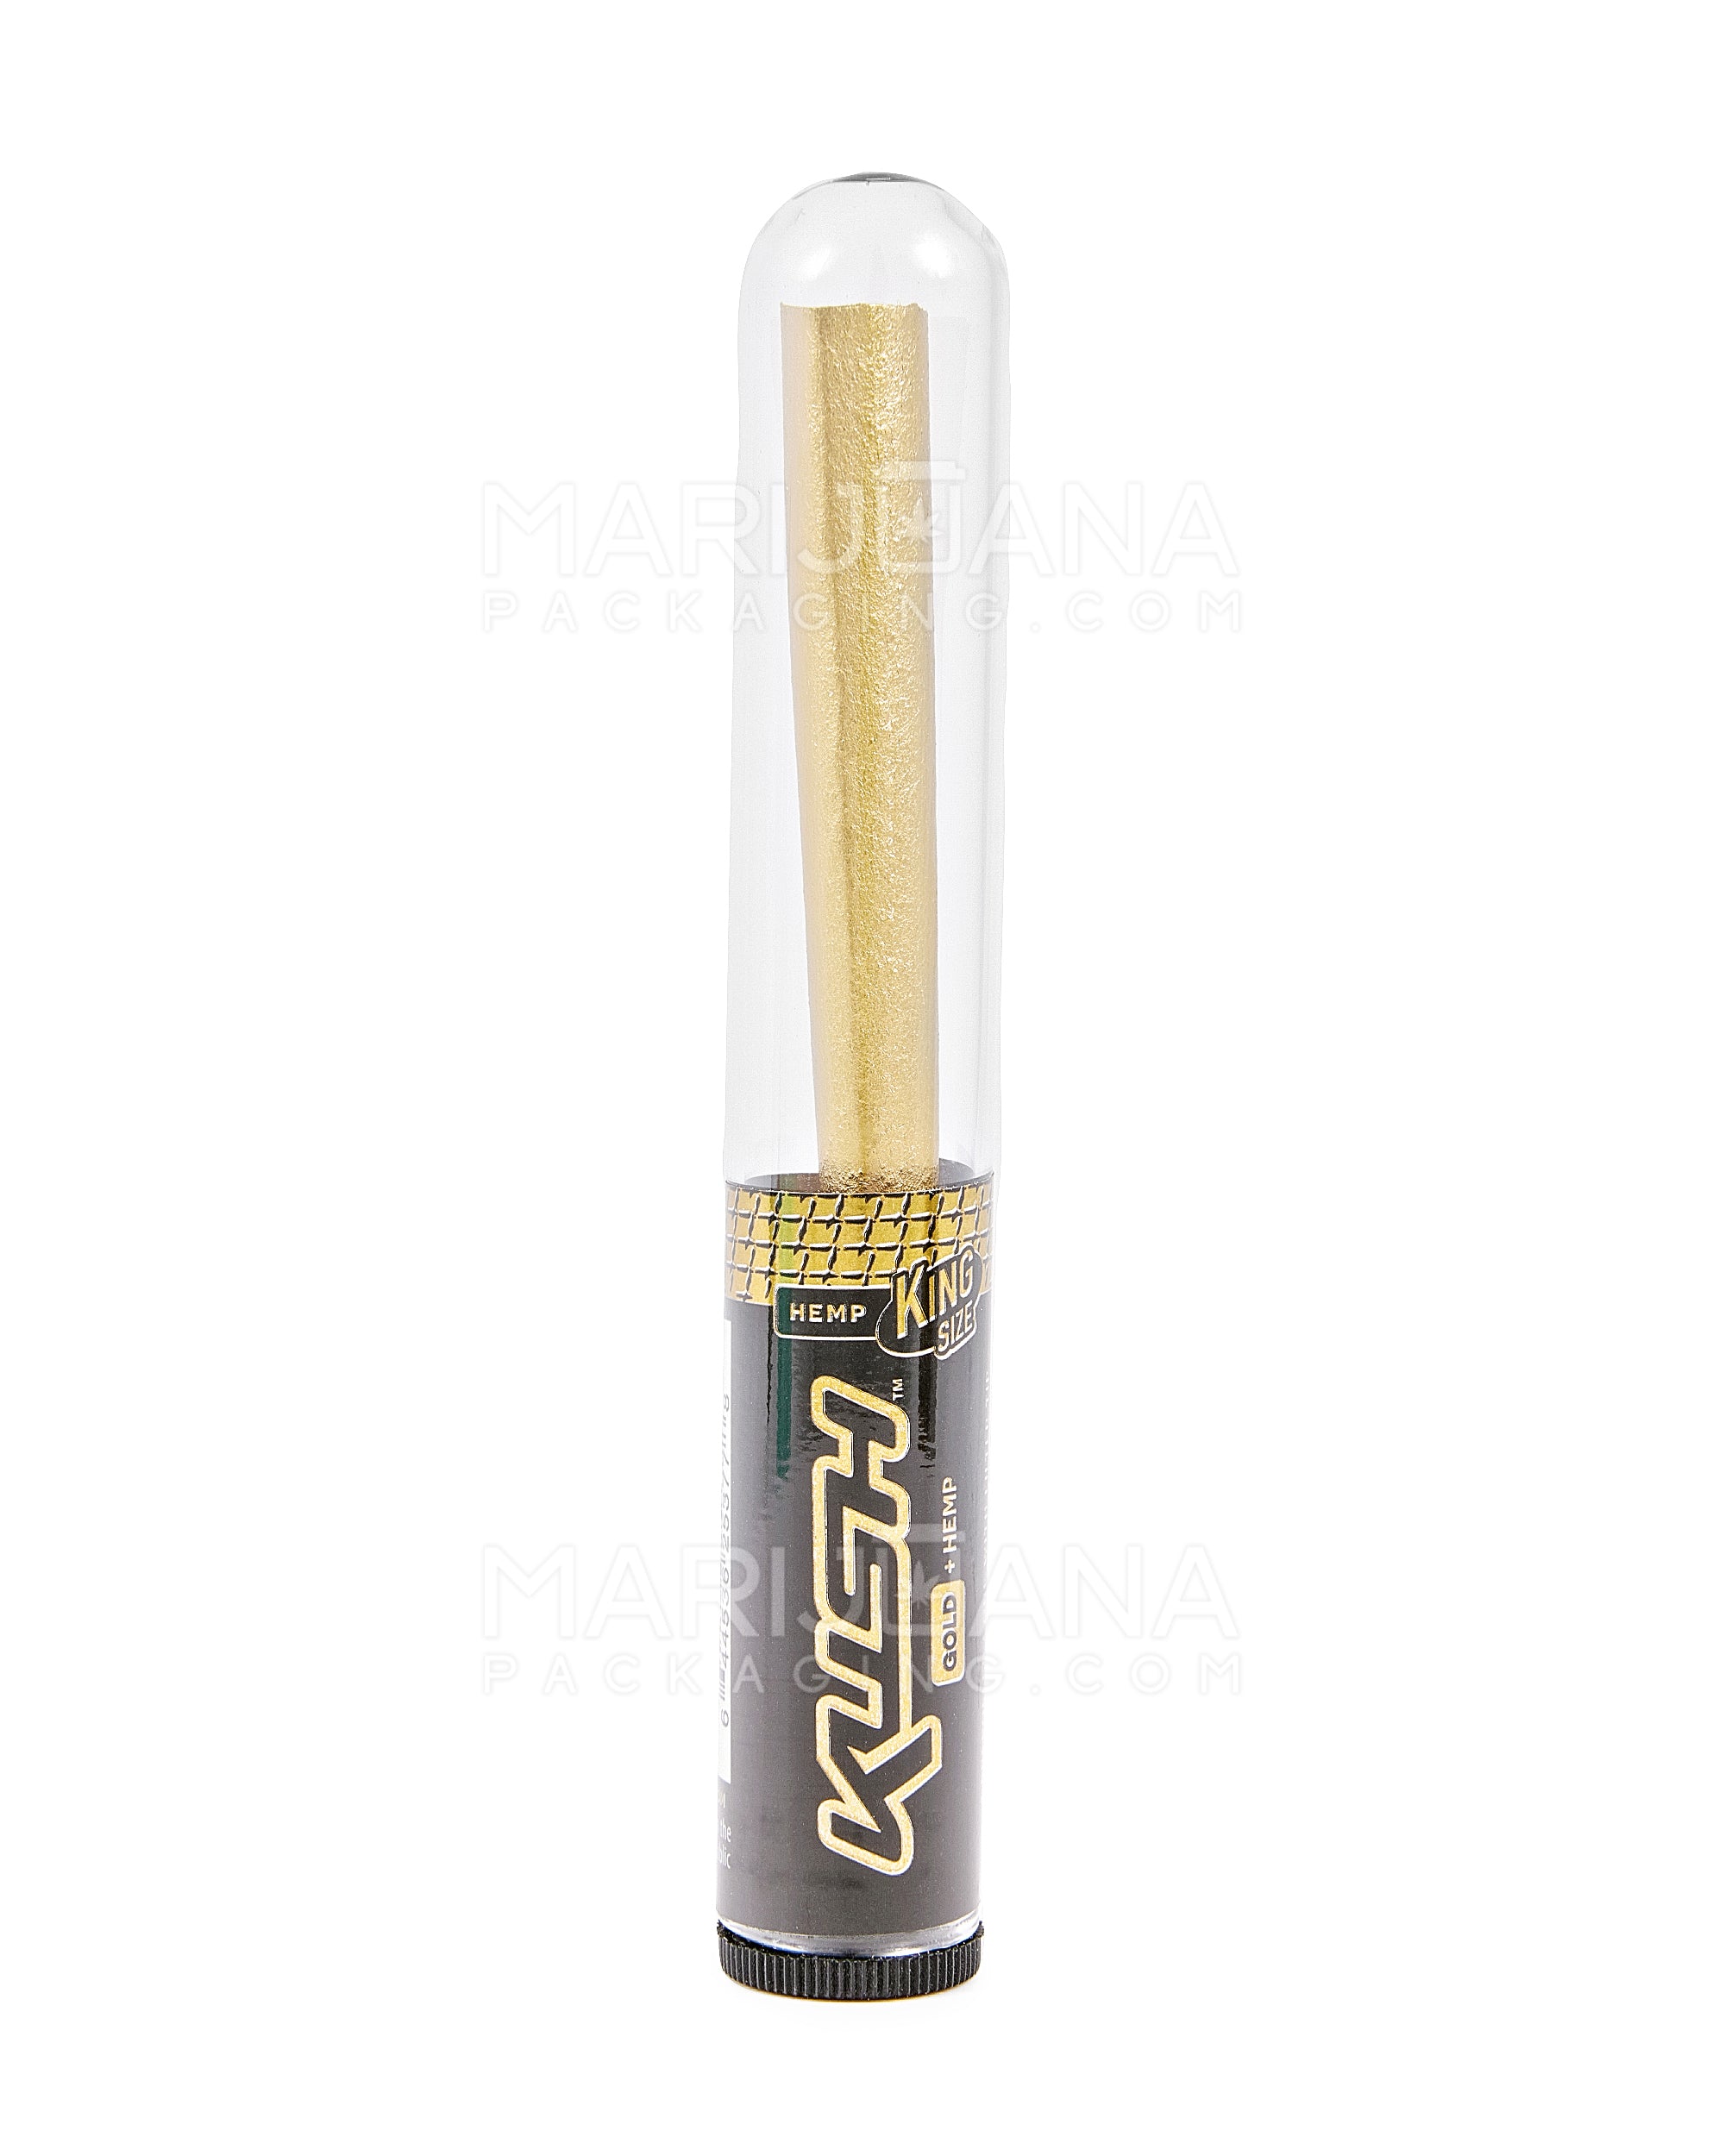 KUSH | 'Retail Display' 24K Gold King Size Hemp Pre Rolled Cones | 63mm - Edible Gold - 8 Count - 2